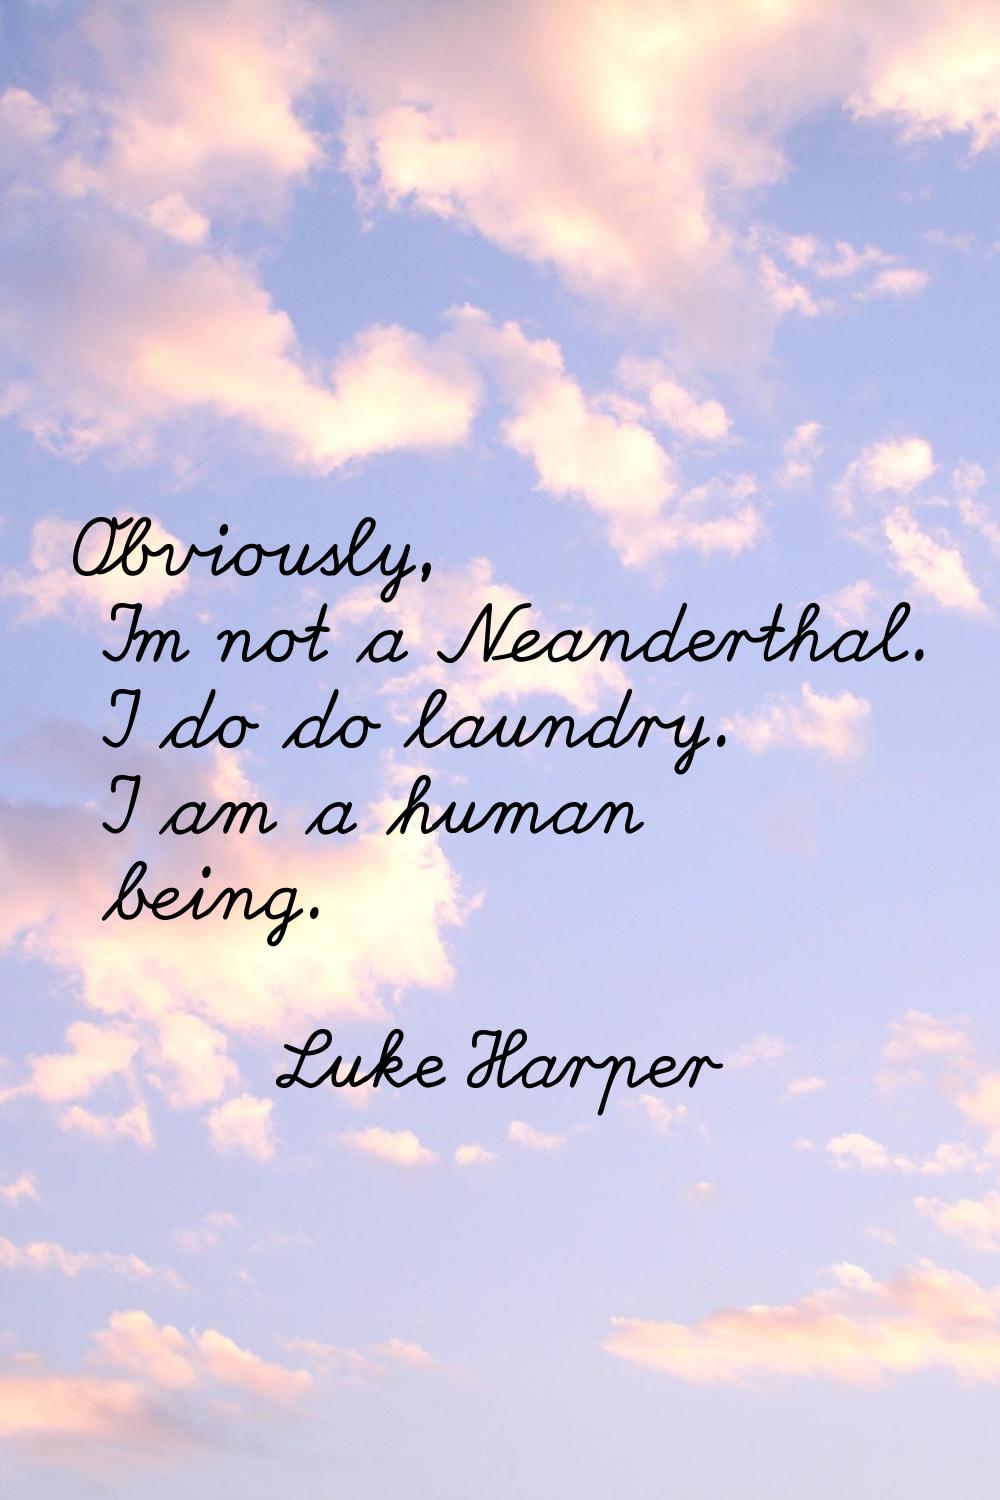 Obviously, I'm not a Neanderthal. I do do laundry. I am a human being.